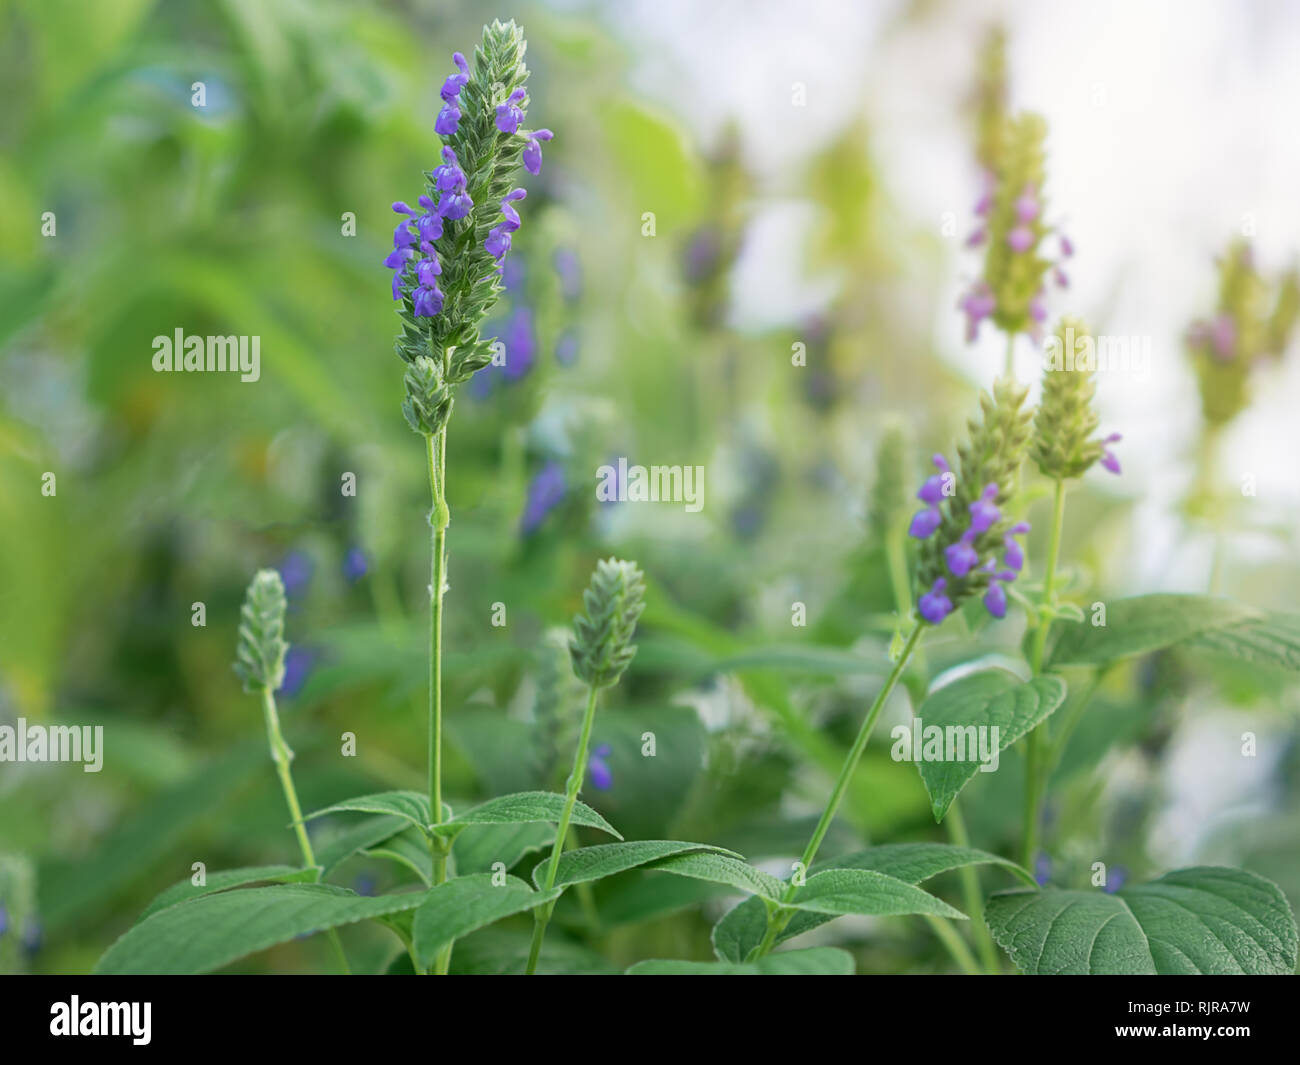 Salvia hispanica flowers, known as Chia, a healthy food plant with purple flowers from the mint family, Lamiaceae growing in garden Stock Photo